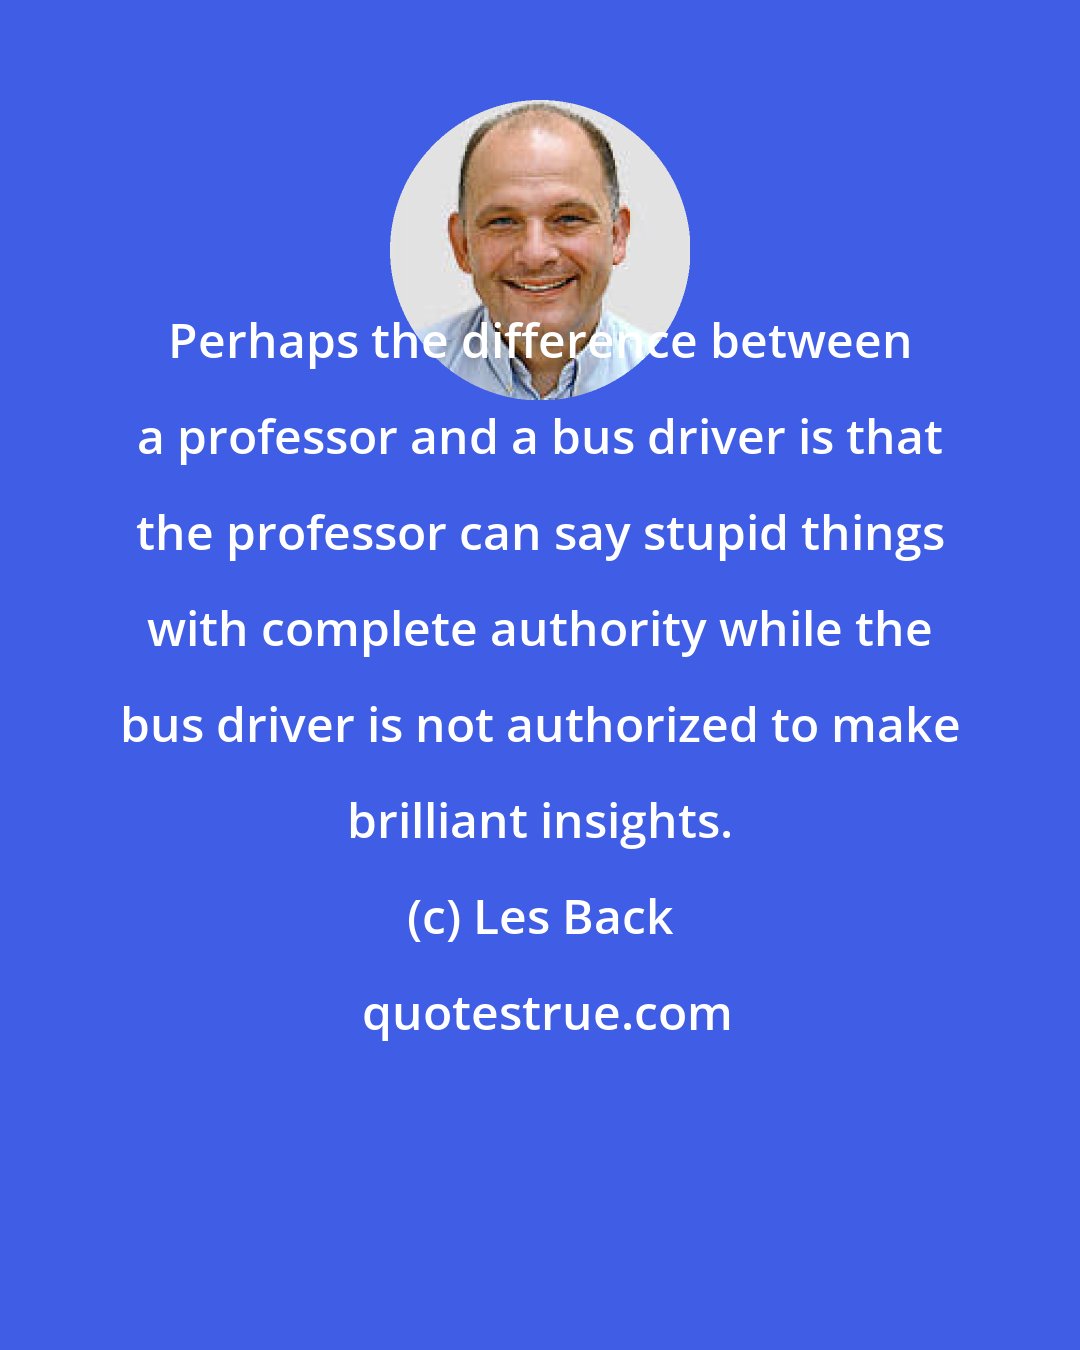 Les Back: Perhaps the difference between a professor and a bus driver is that the professor can say stupid things with complete authority while the bus driver is not authorized to make brilliant insights.